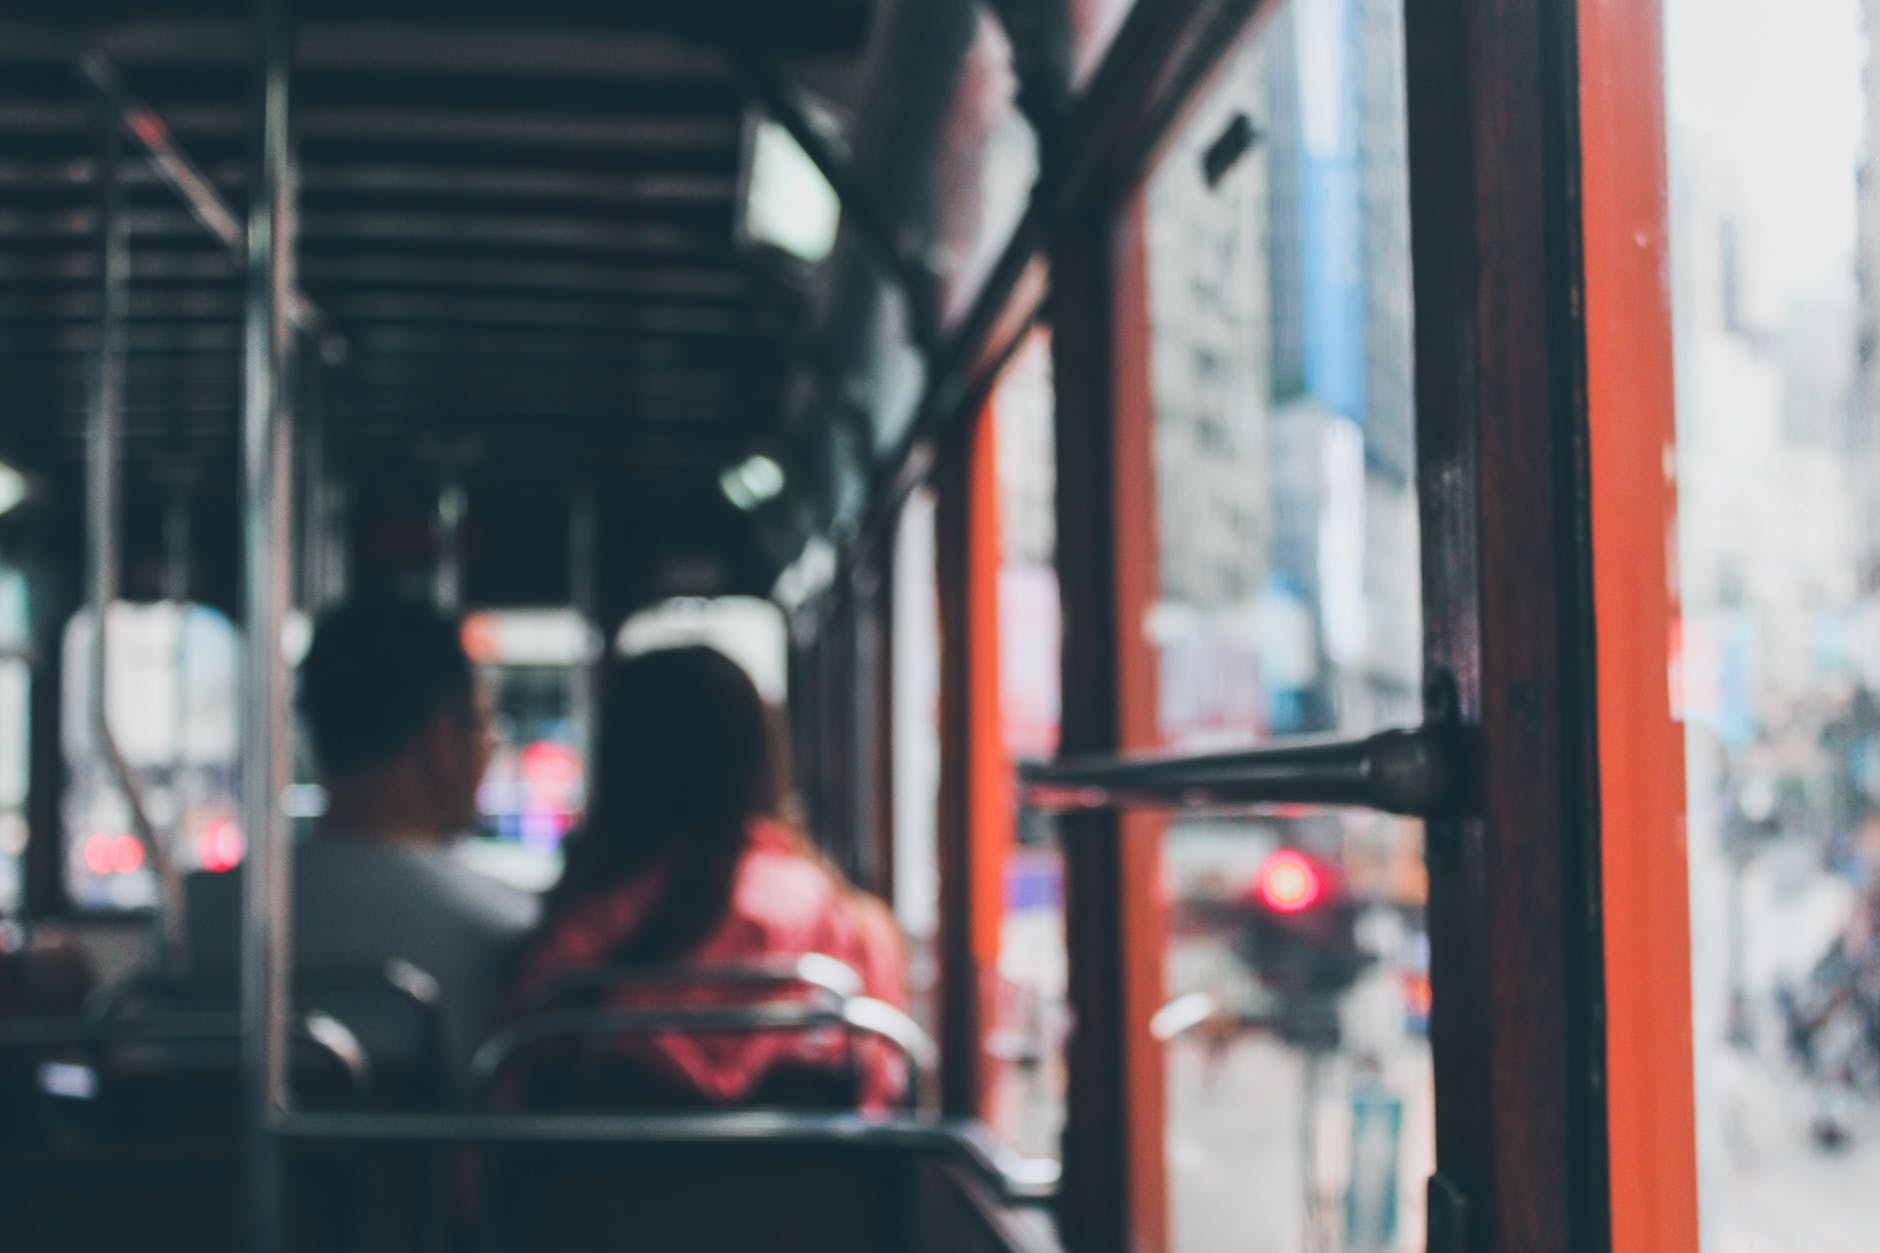 She sat on the bus and slept for most of the ride. | Source: Pexels